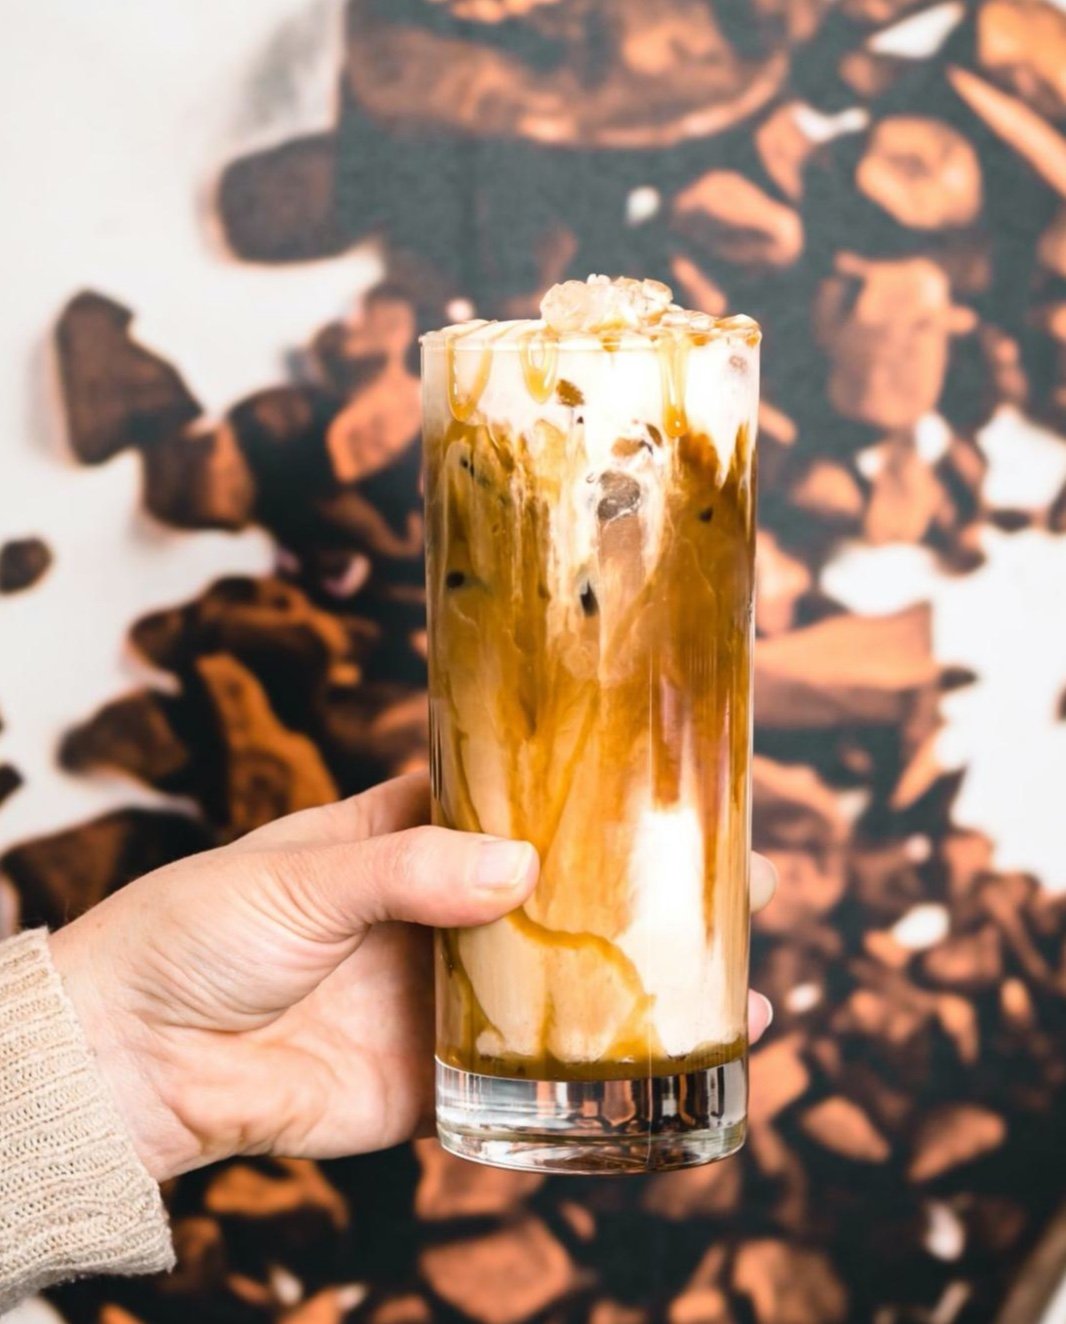 Indulge in the cold and creamy delight of an iced caramel macchiato from Primrose Cafe. Each sip is a moment of pure caramel bliss 🧊☕️

#primrosecafe #primrose #albanynycafe #icedcaramelmacchiato #upstatenycafe #icedcoffee #518foodies #albanyny #dis